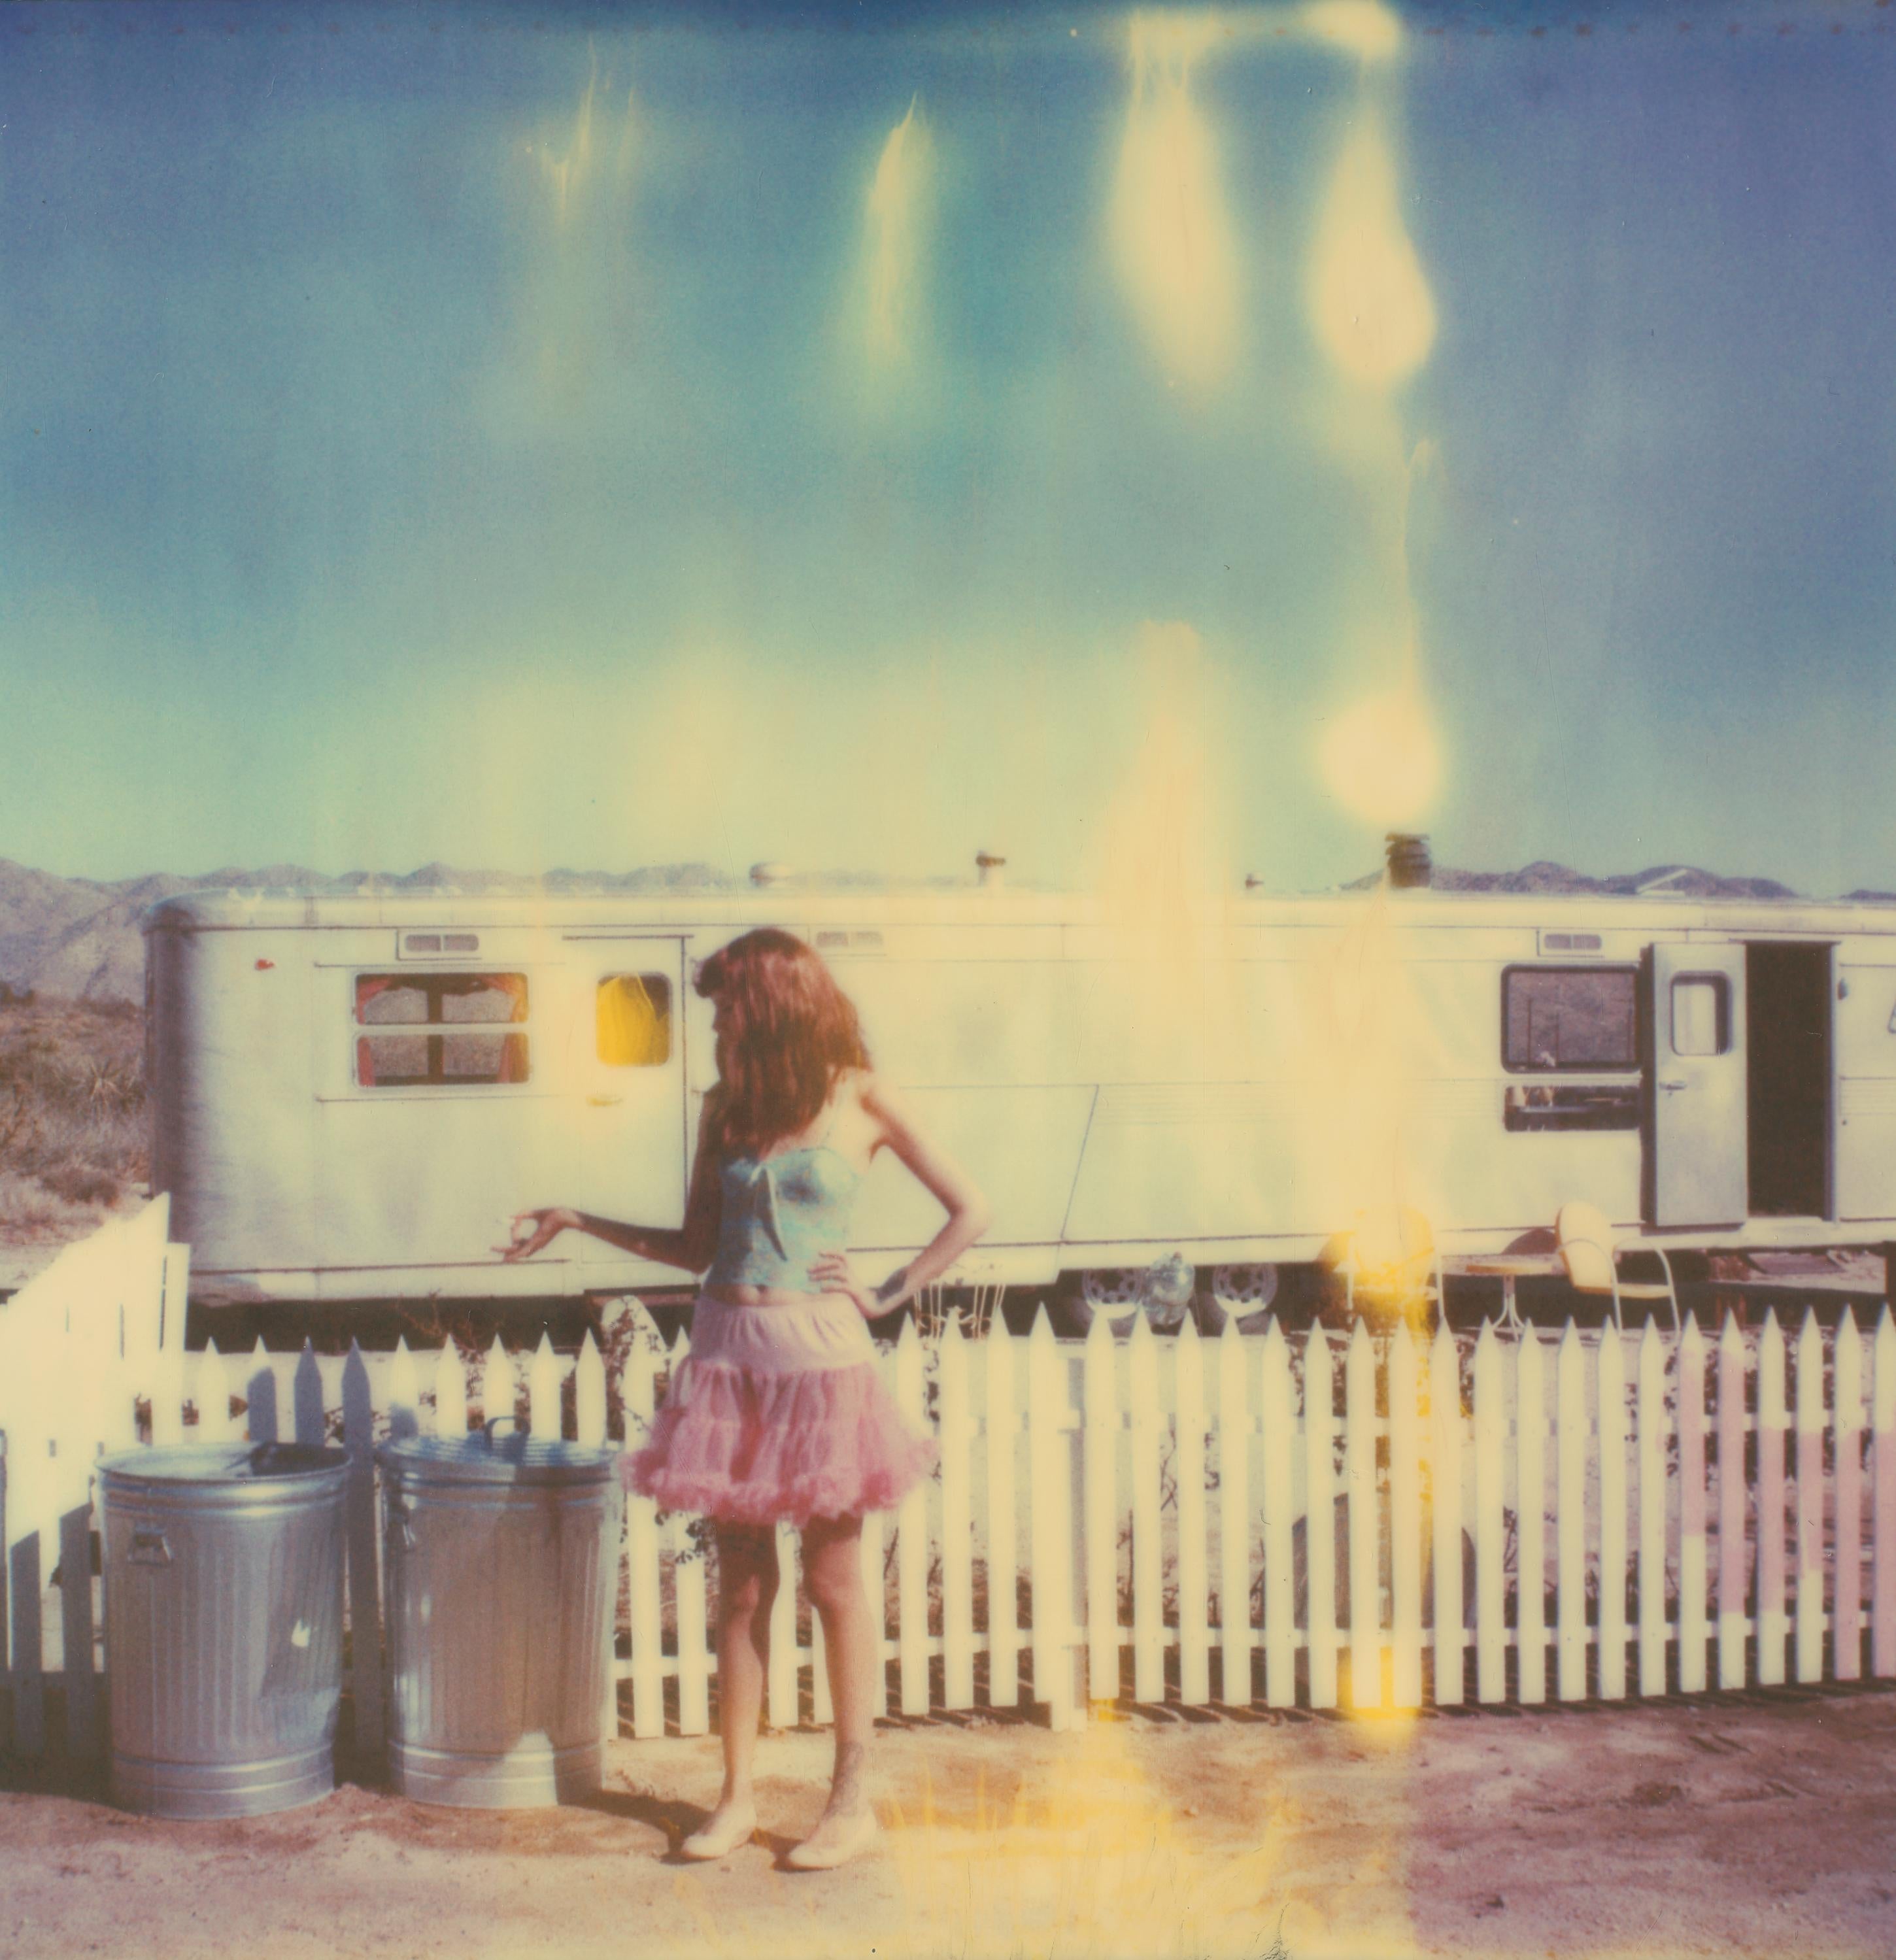 Stefanie Schneider Figurative Photograph - Making Magic - The Girl behind the White Picket Fence